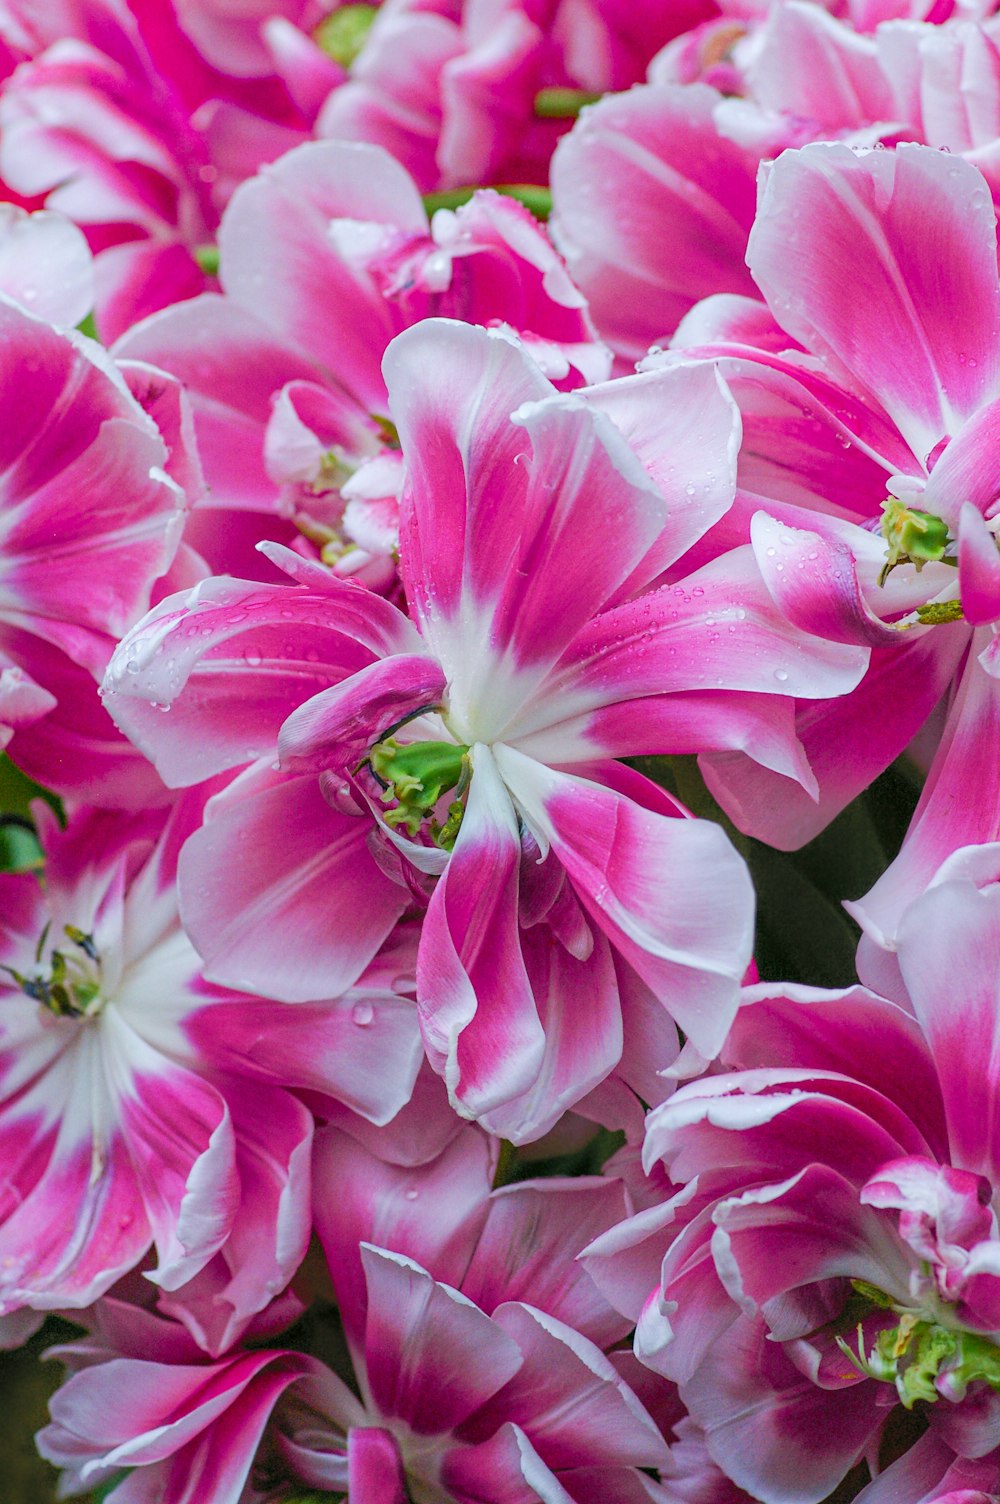 a bunch of pink and white flowers with drops of water on them